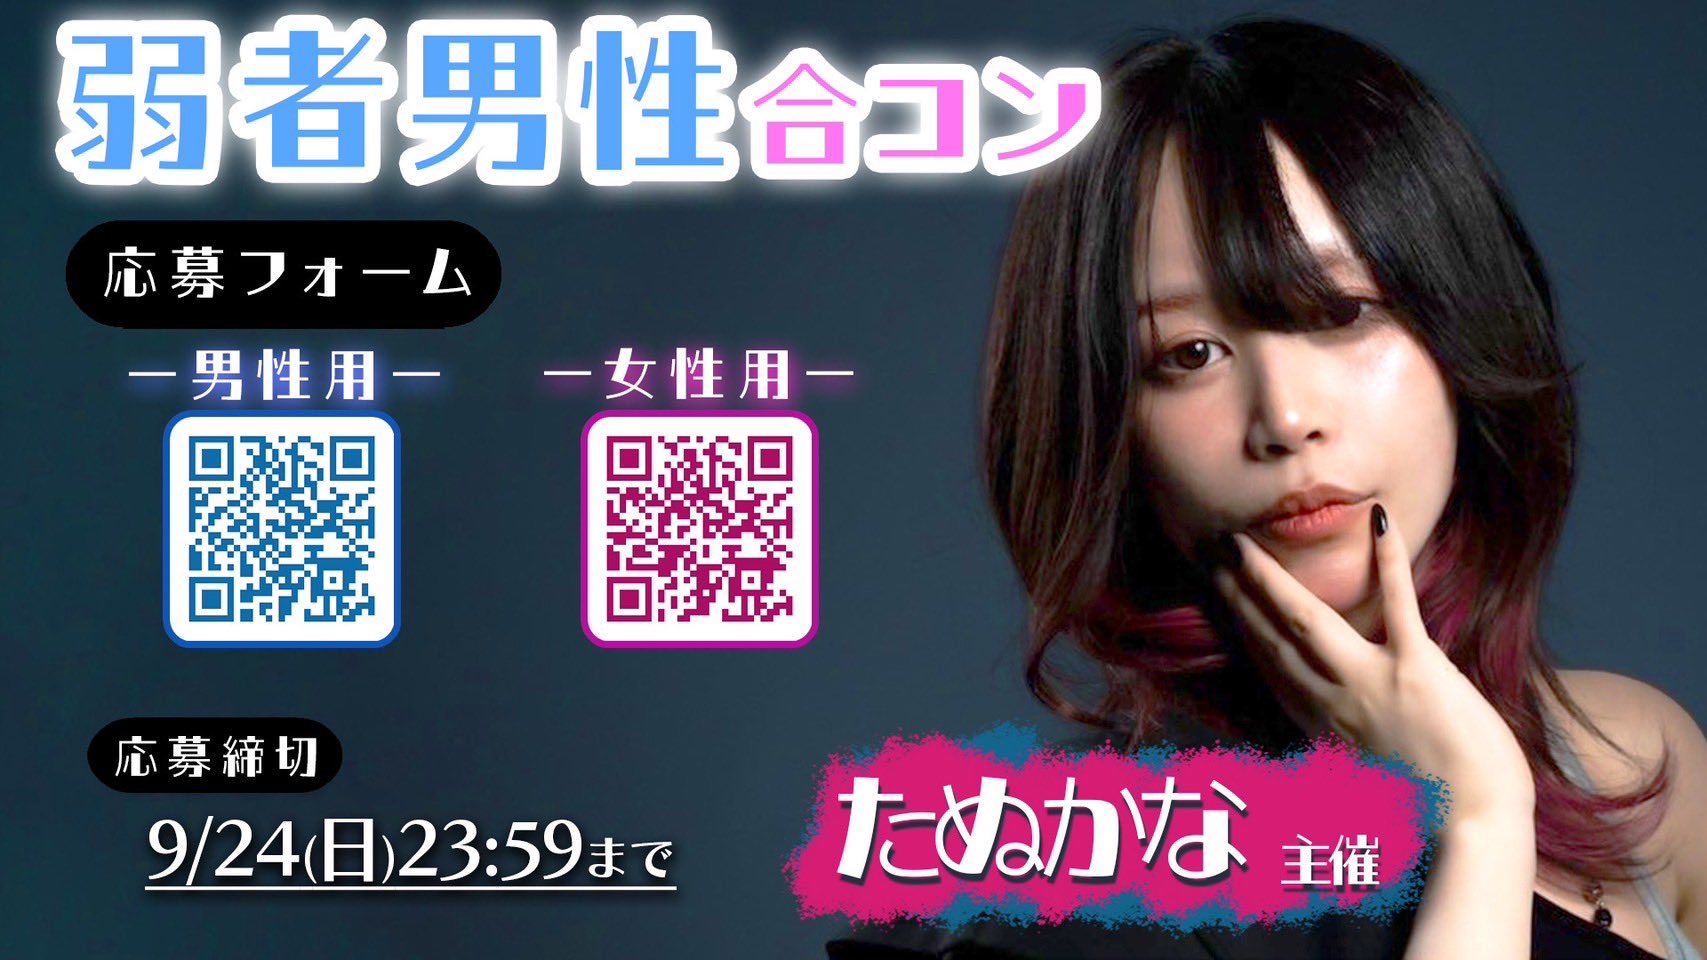 Female Japanese streamer hosts “Incel mixer party” with VIP viewing seats 